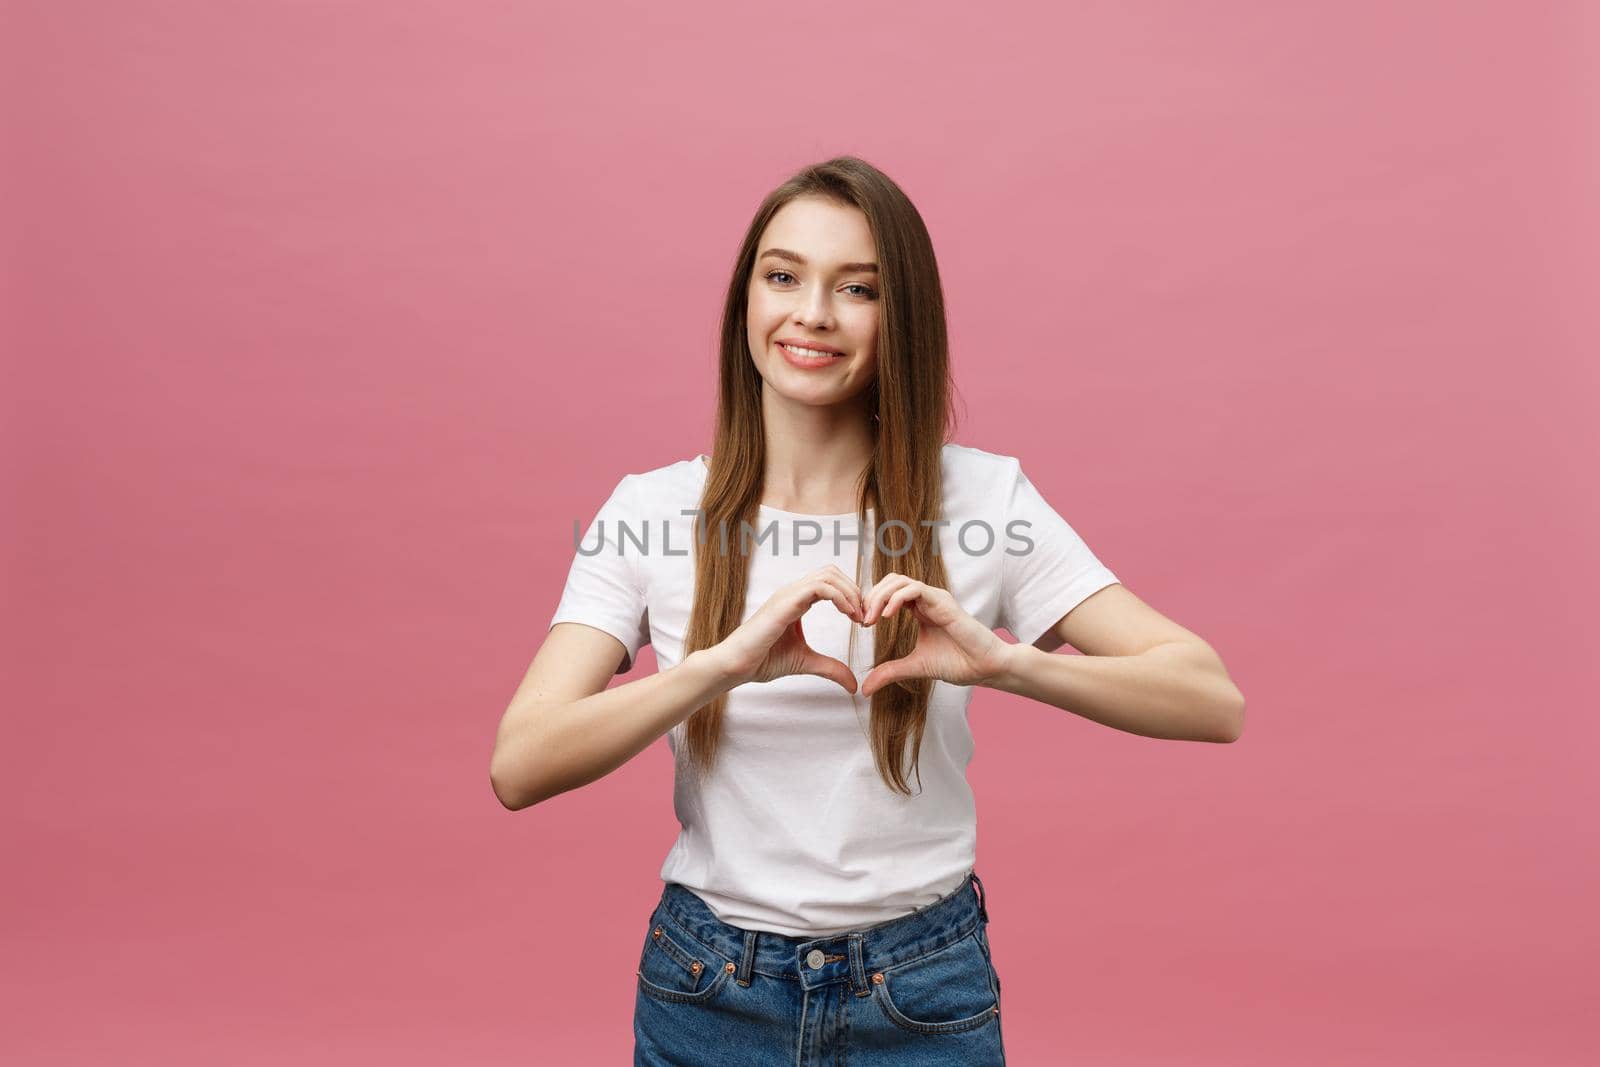 Lifestyle Concept: Beautiful attractive woman in white shirt making a heart symbol with her hands.